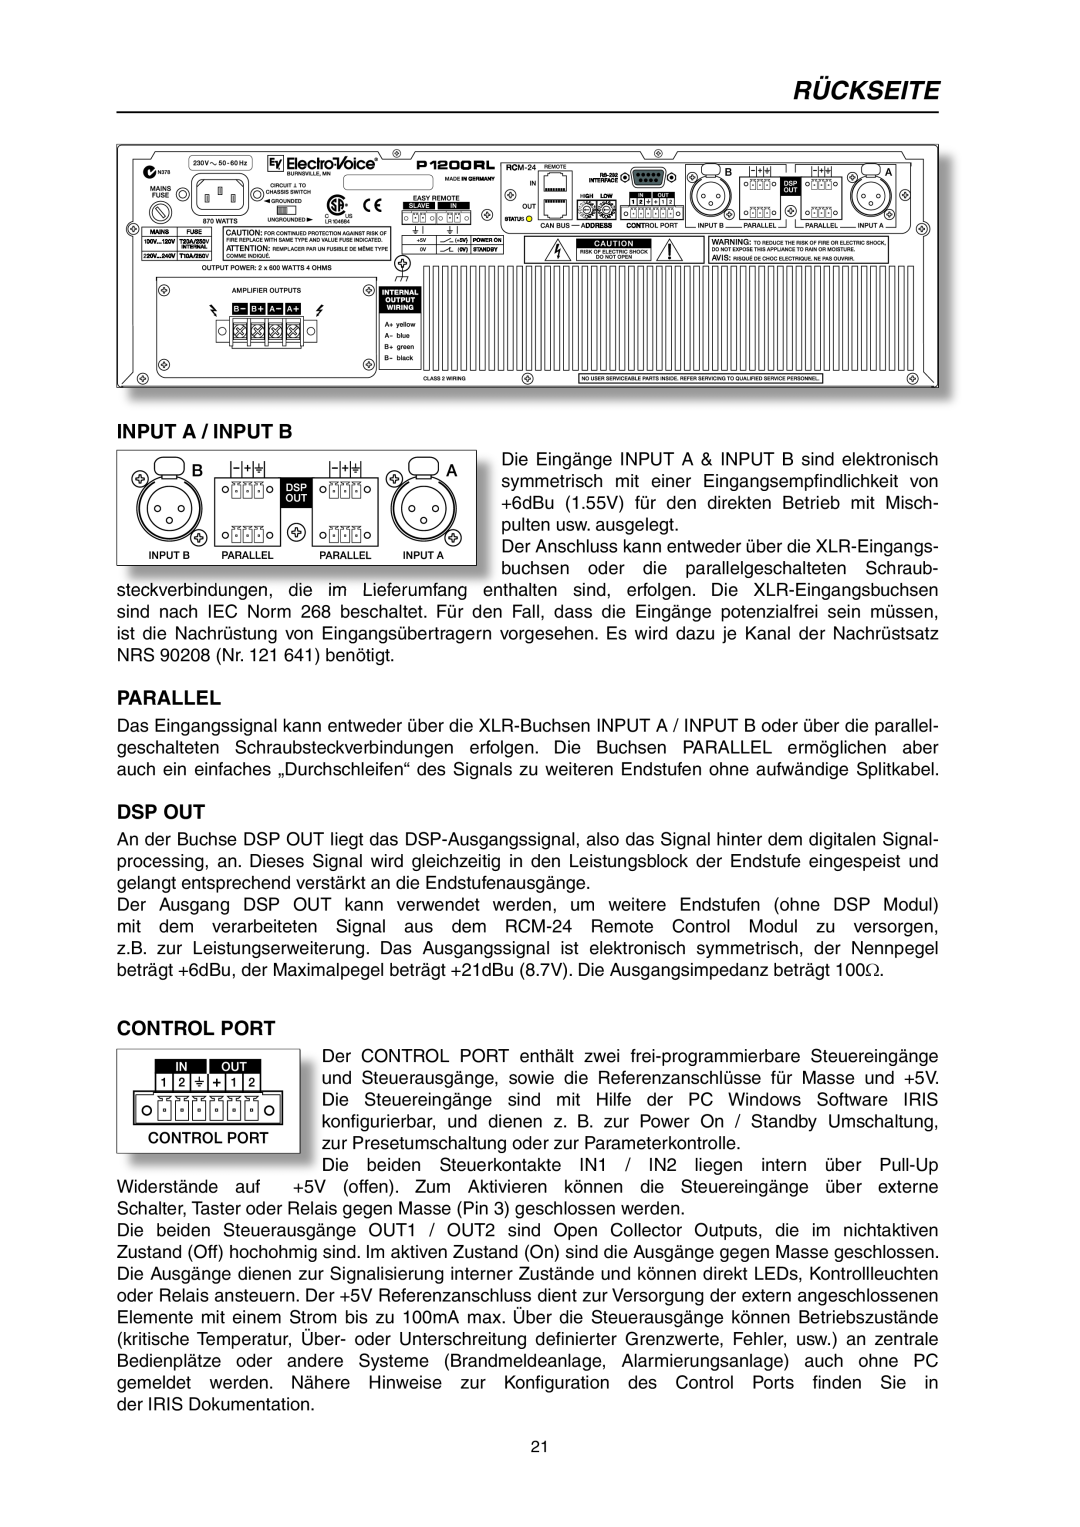 Electro-Voice P1200RL, P900RL owner manual Rückseite, Parallel, Input A / Input B, Dsp Out, Control Port 